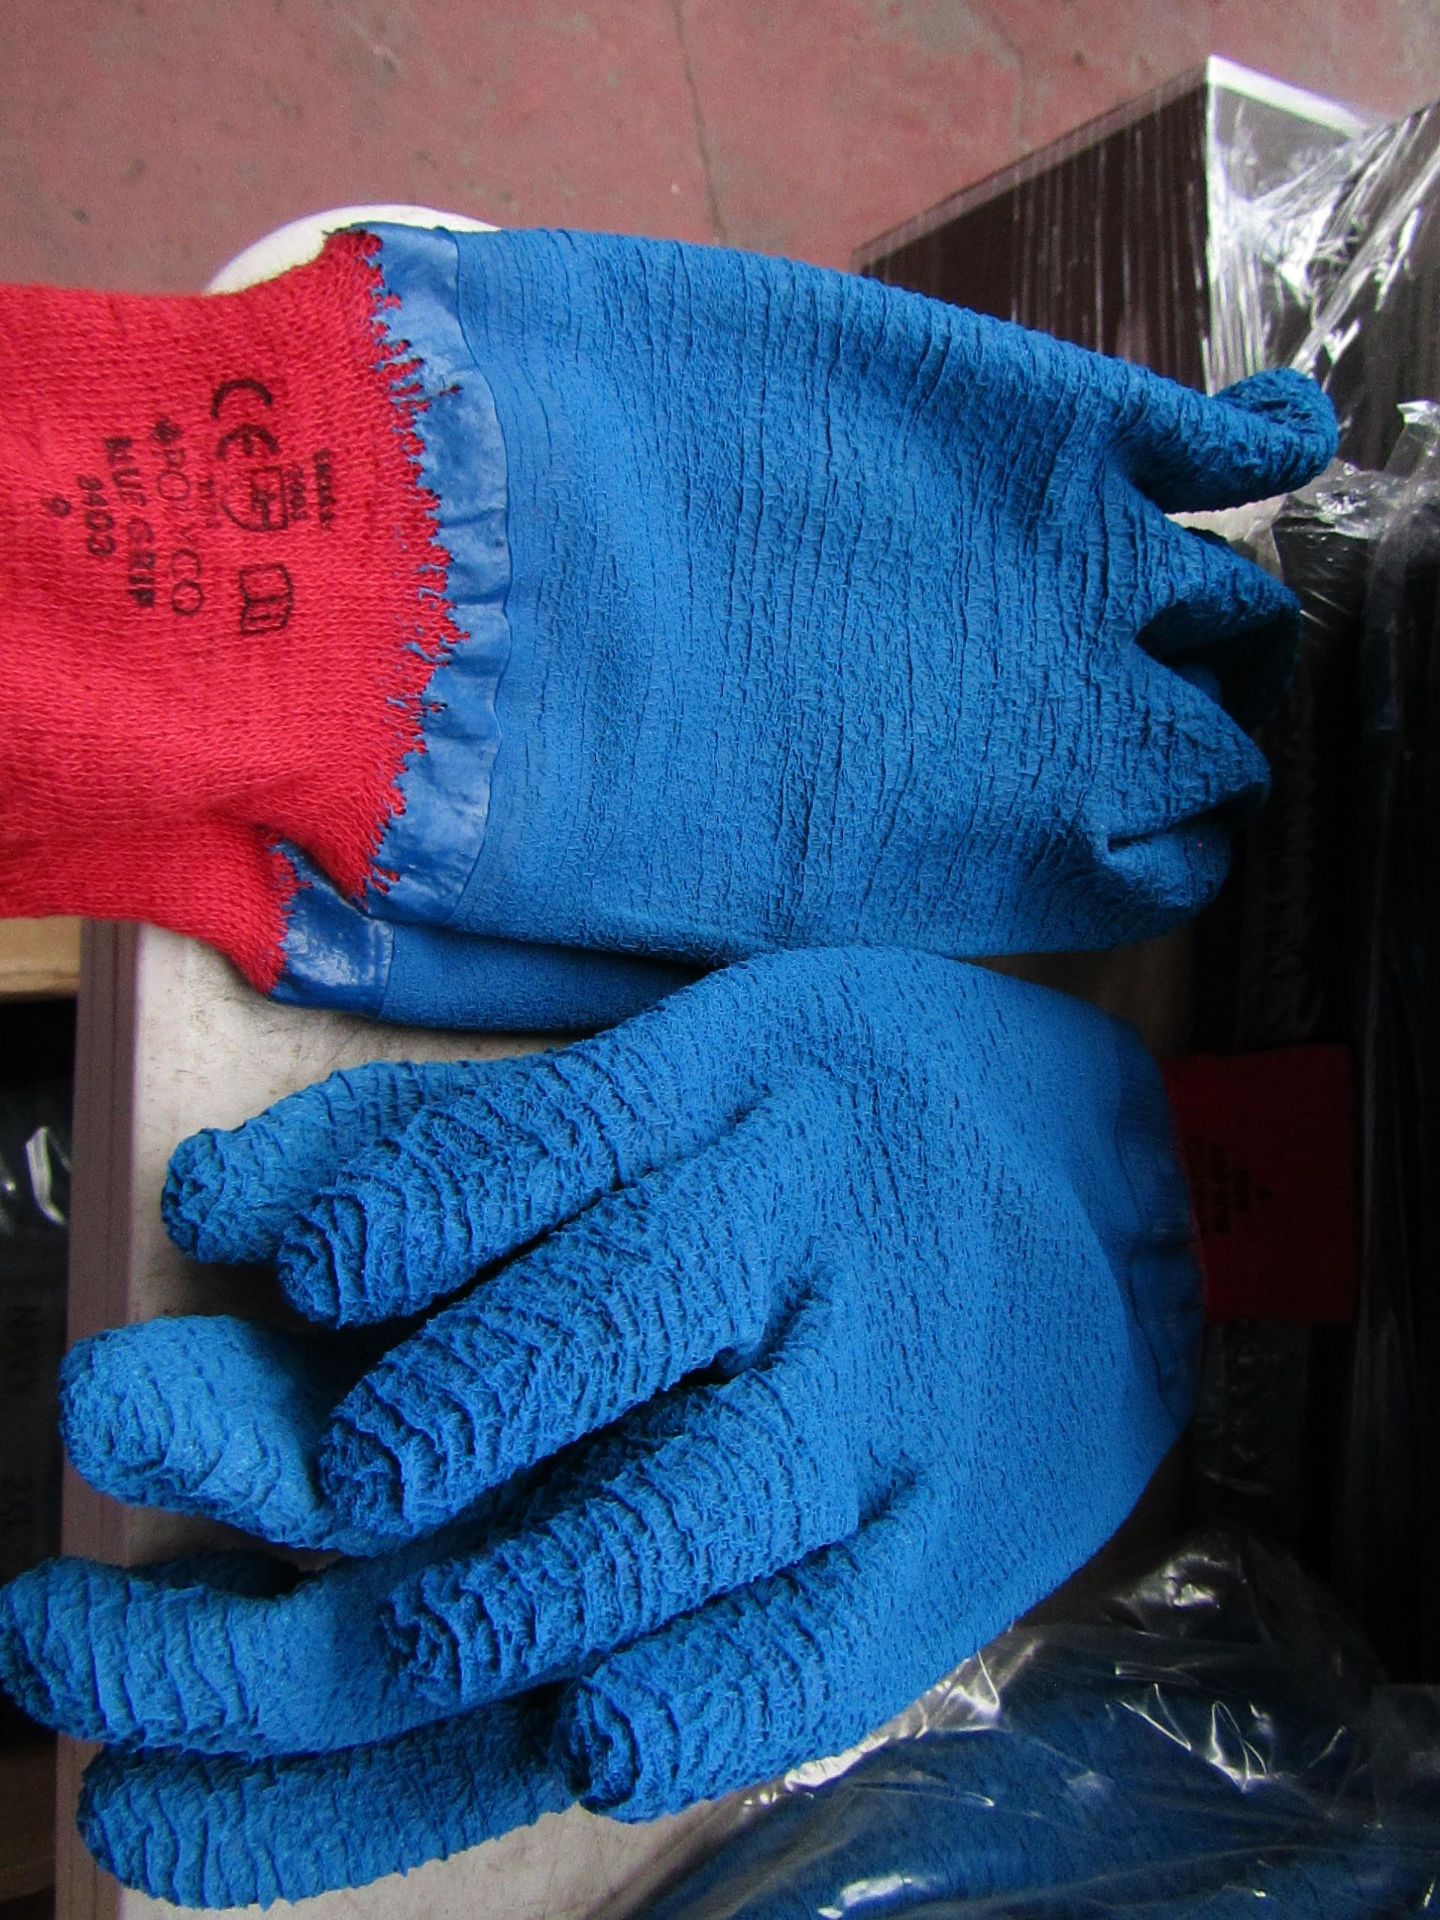 2x Pairs of PolyCo - Blue Grip Gloves - Size 9 - All New.